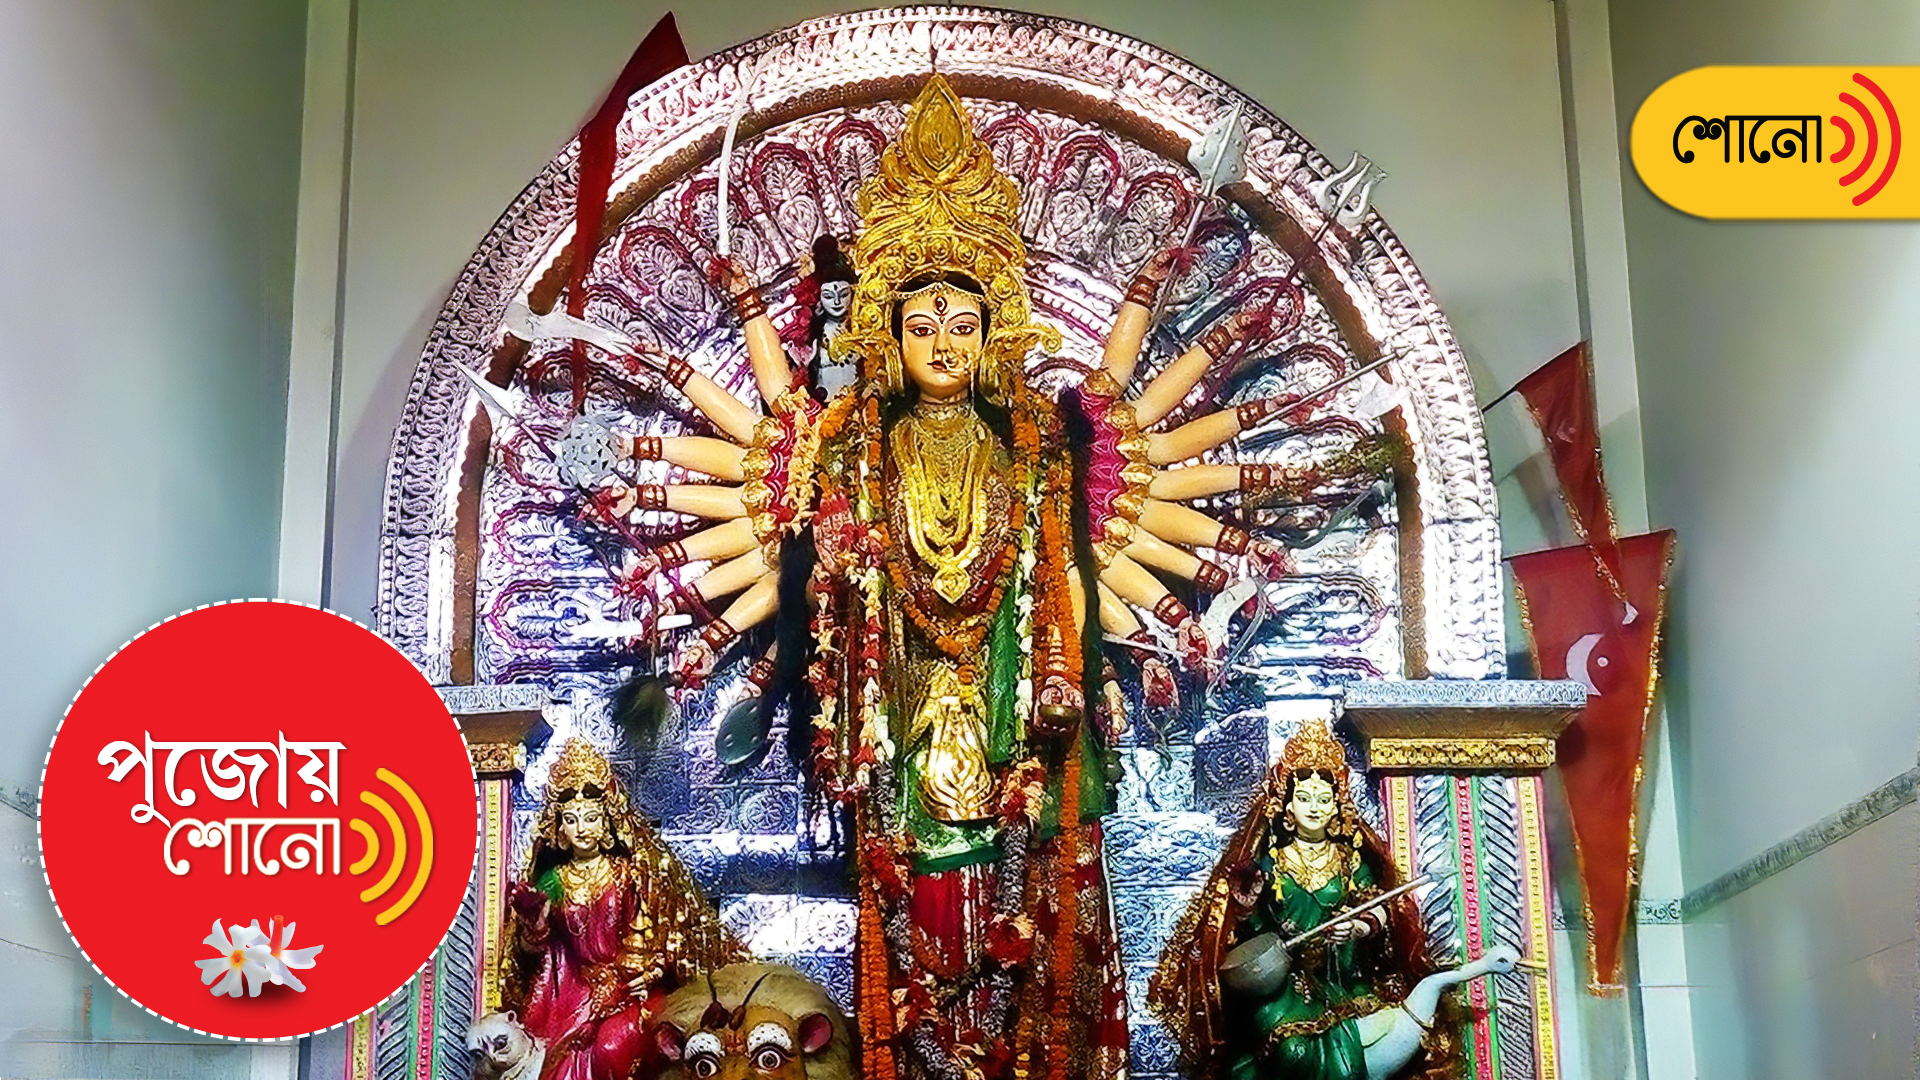 know more about the Durga temple and the idols around India